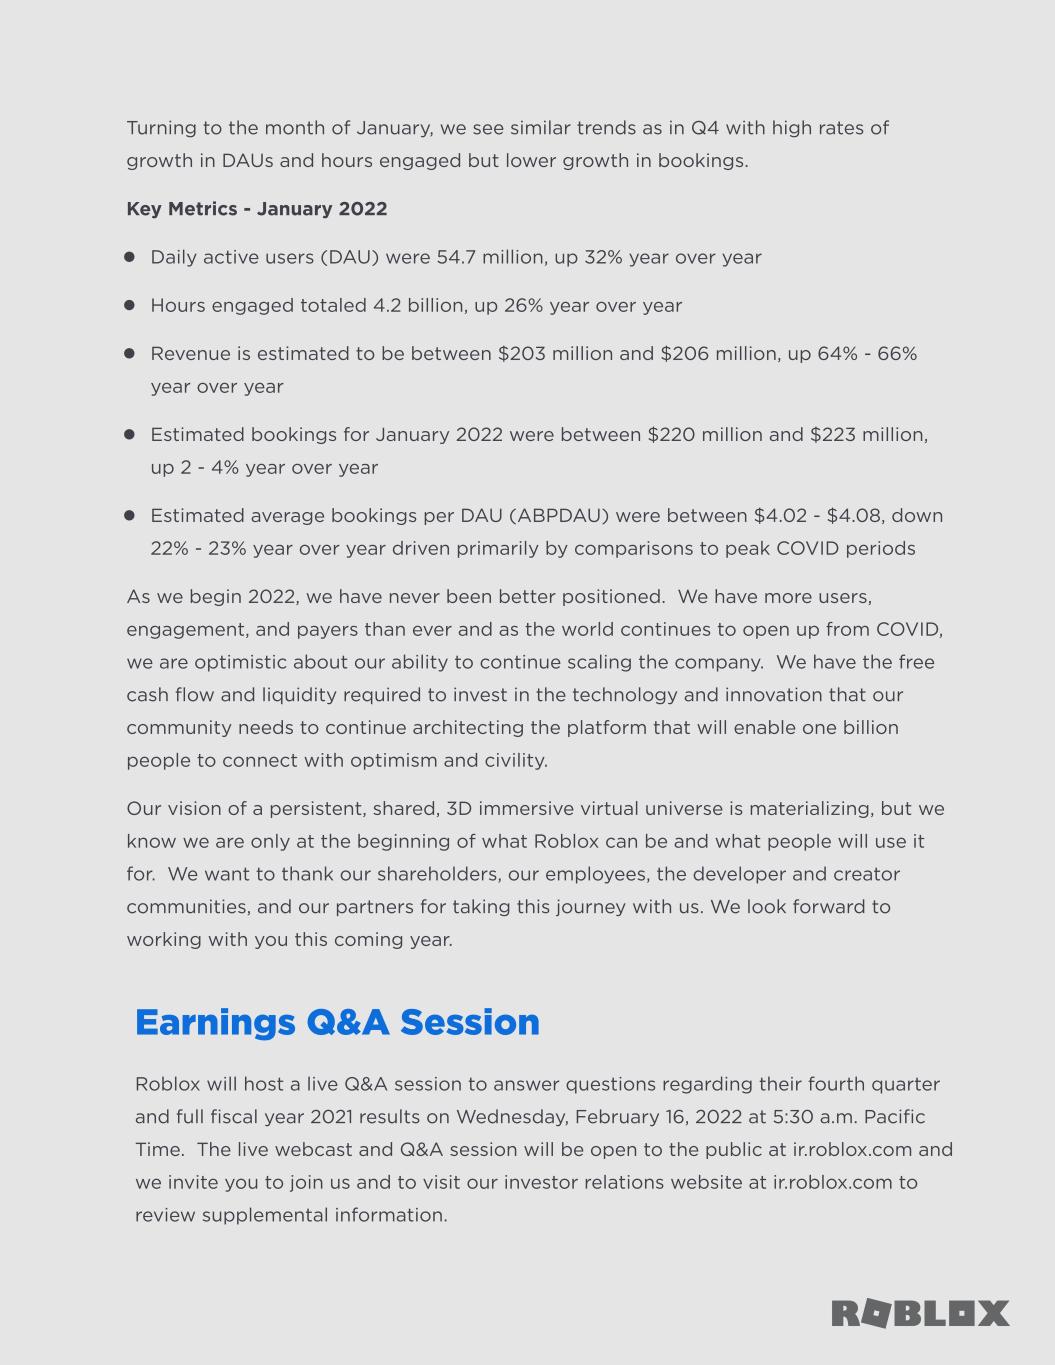 Roblox (RBLX) Q3 2023 earnings results report 20% increase in DAUs  year-over-year